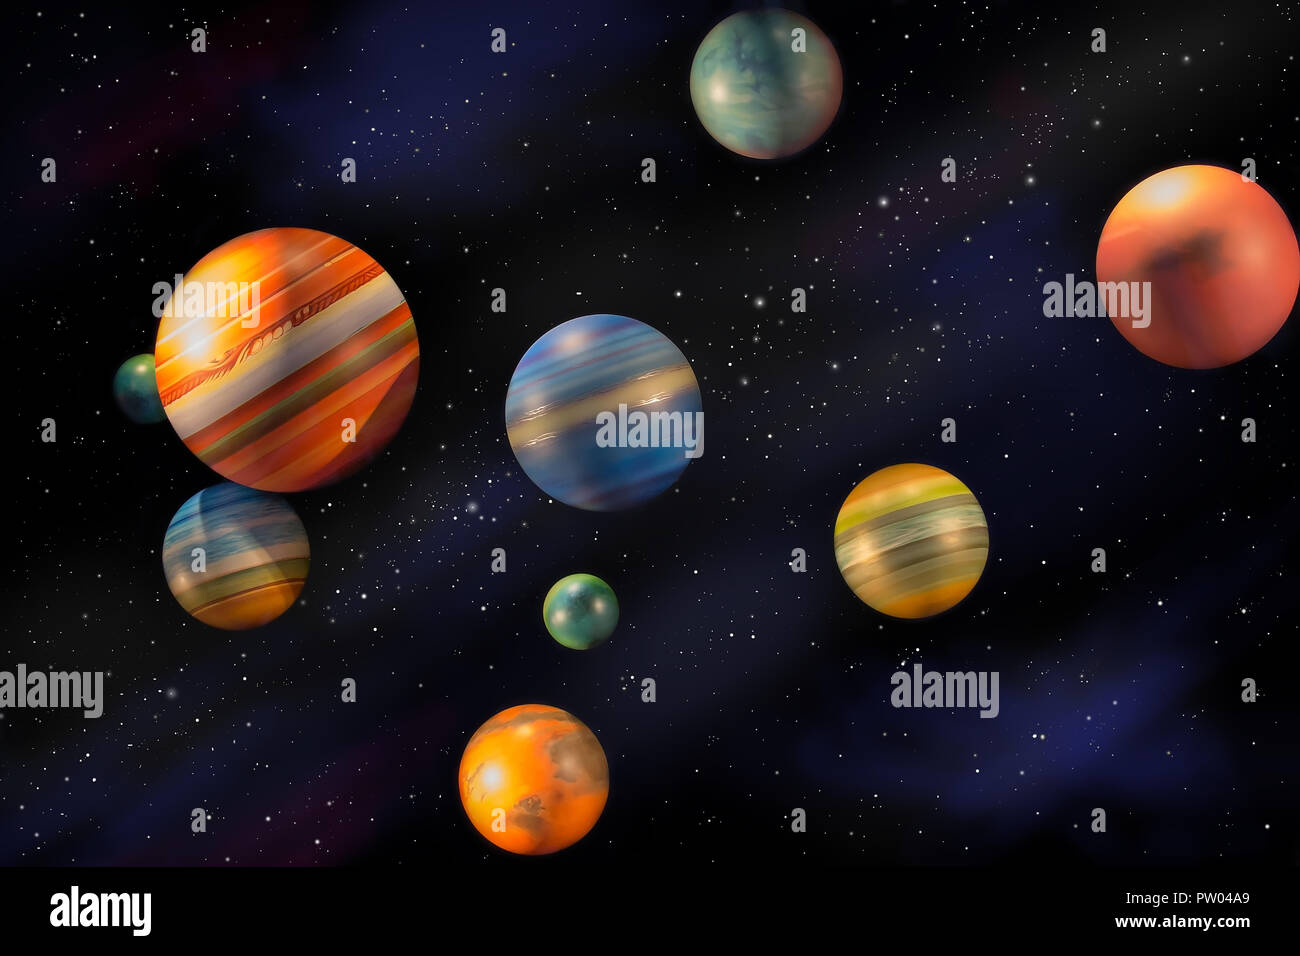 Planets in space universe and stars Stock Photo